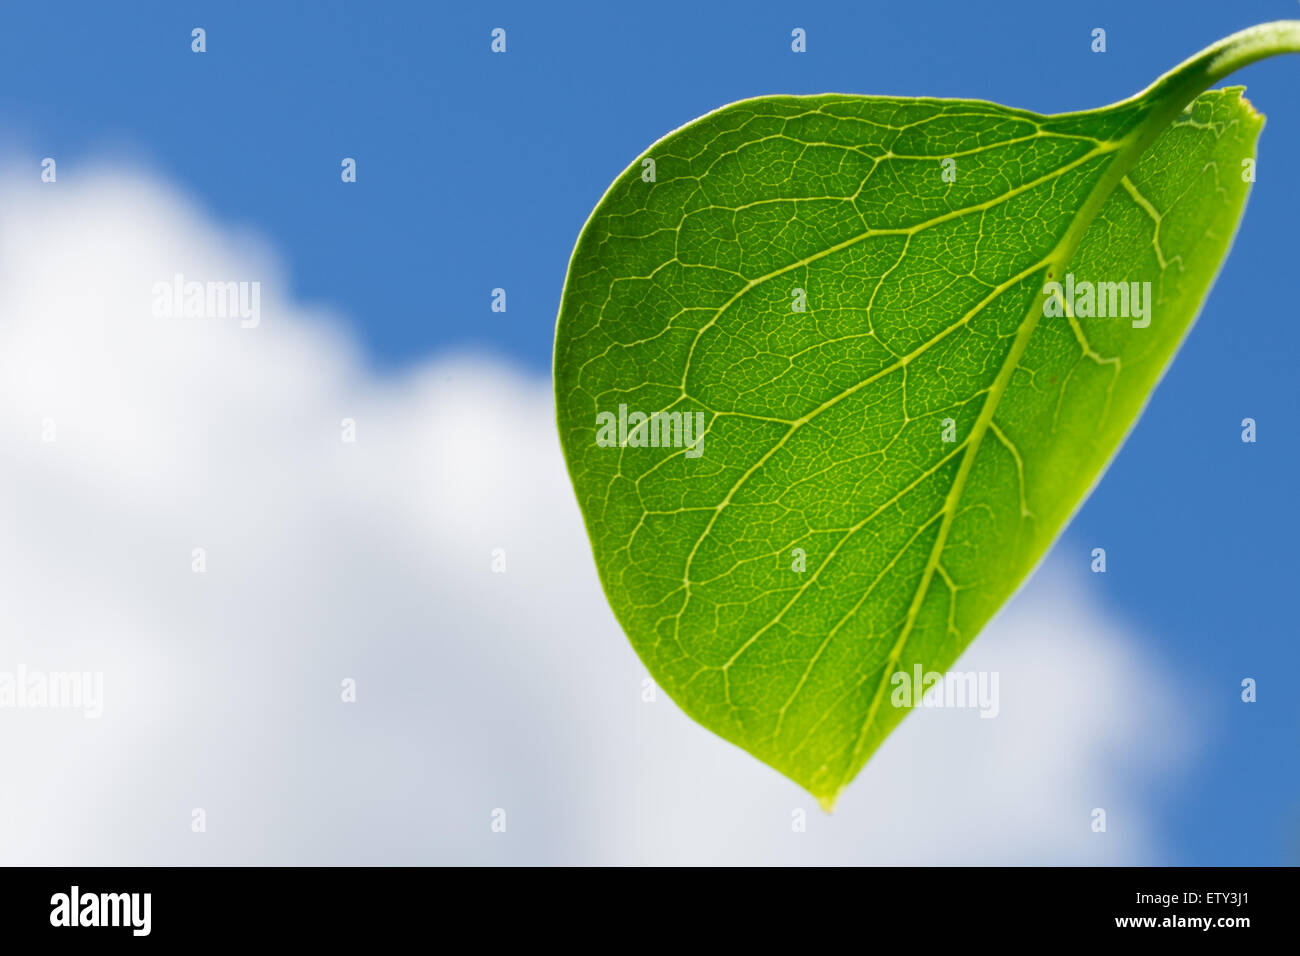 A Large Green Leaf With Visible Veins a Blue Cloudy Sky Stock Photo